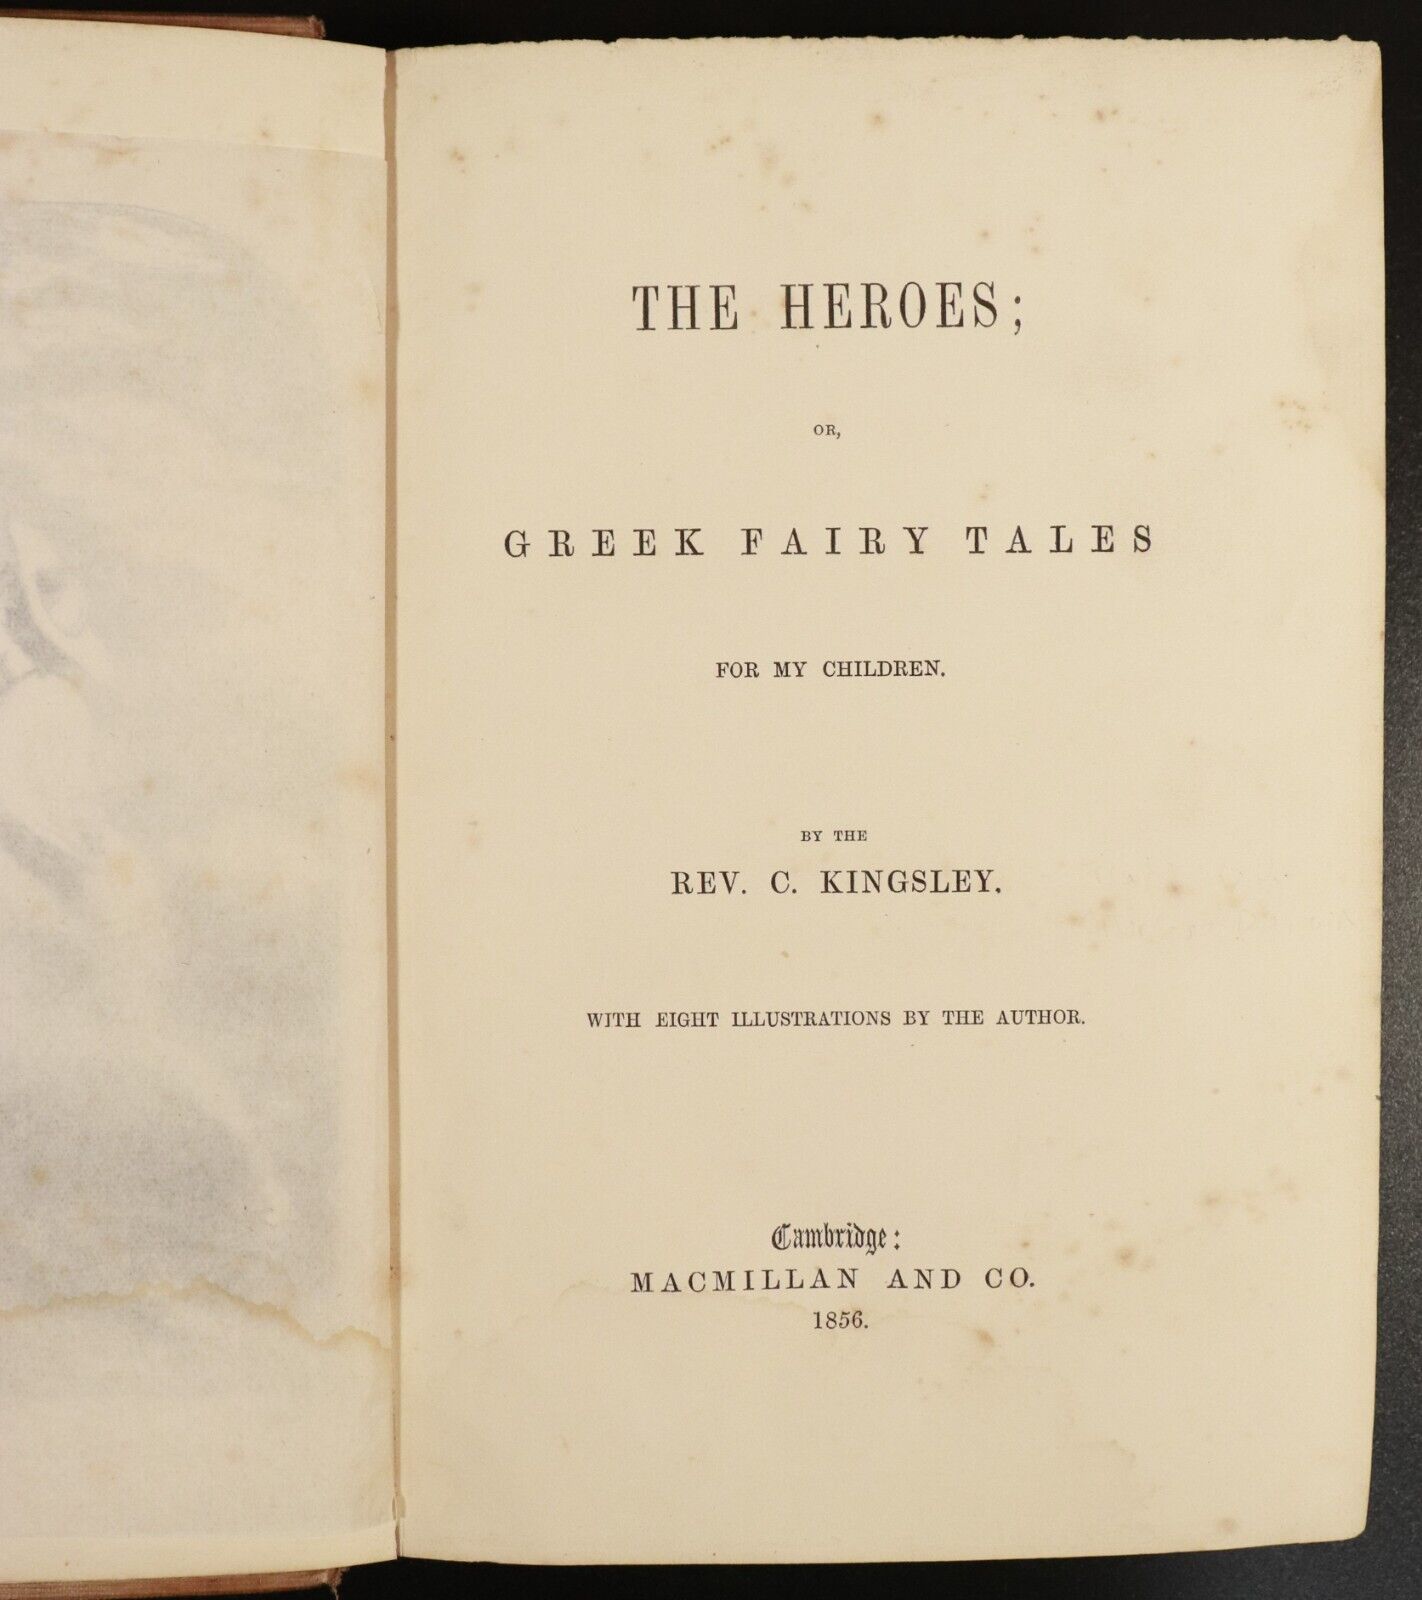 1856 The Heroes: Greek Fairy Tales by C. Kingsley Antiquarian Children's Book